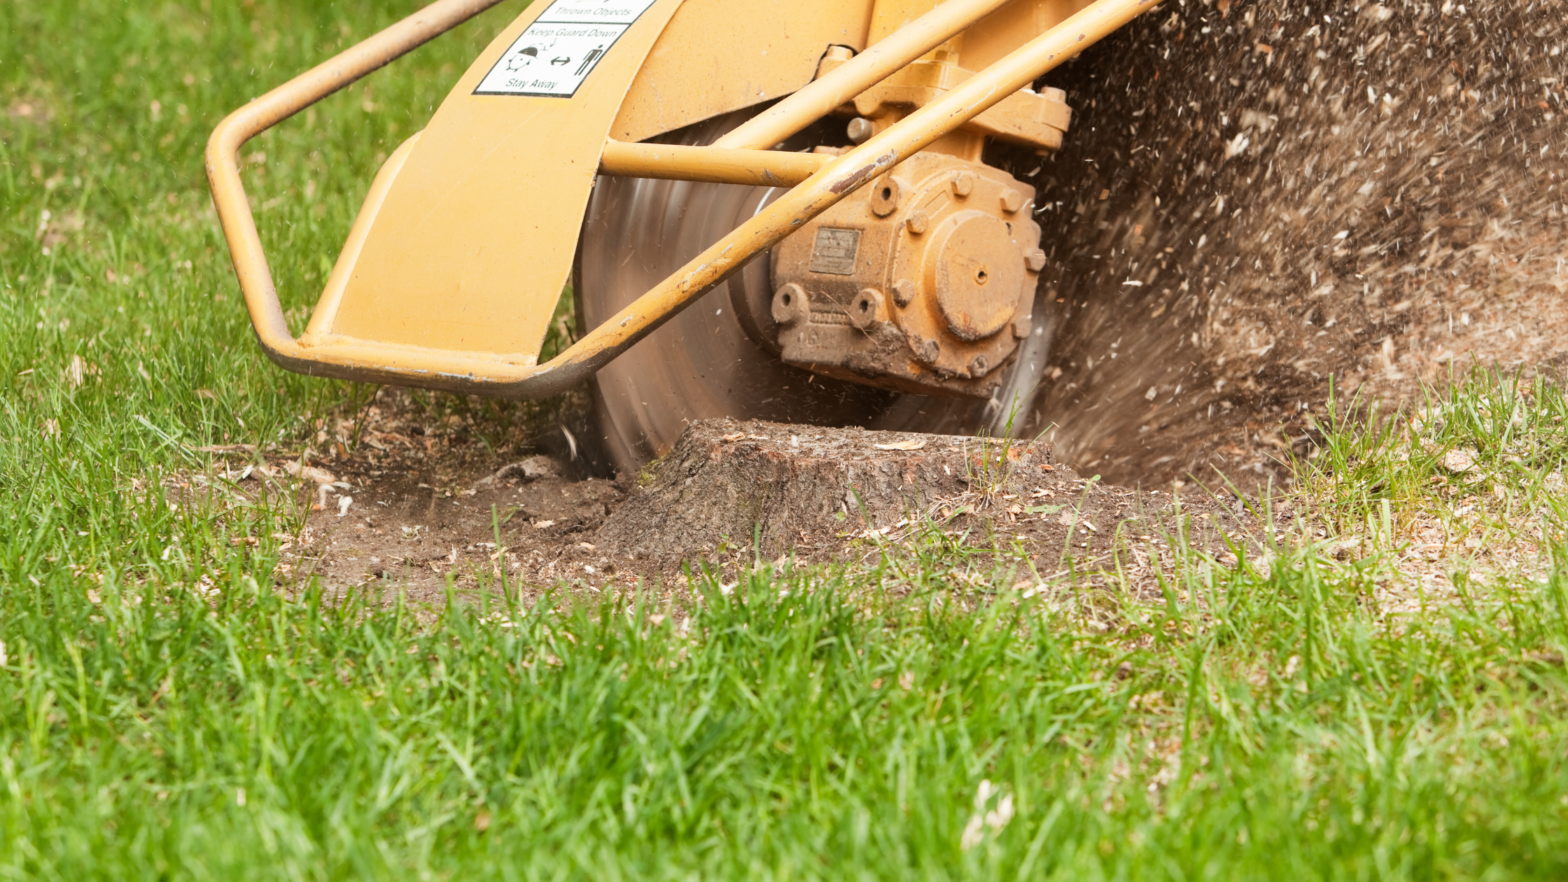 Tree Removal and Stump Grinding: The Best Way to Deal with a Tree or Stump